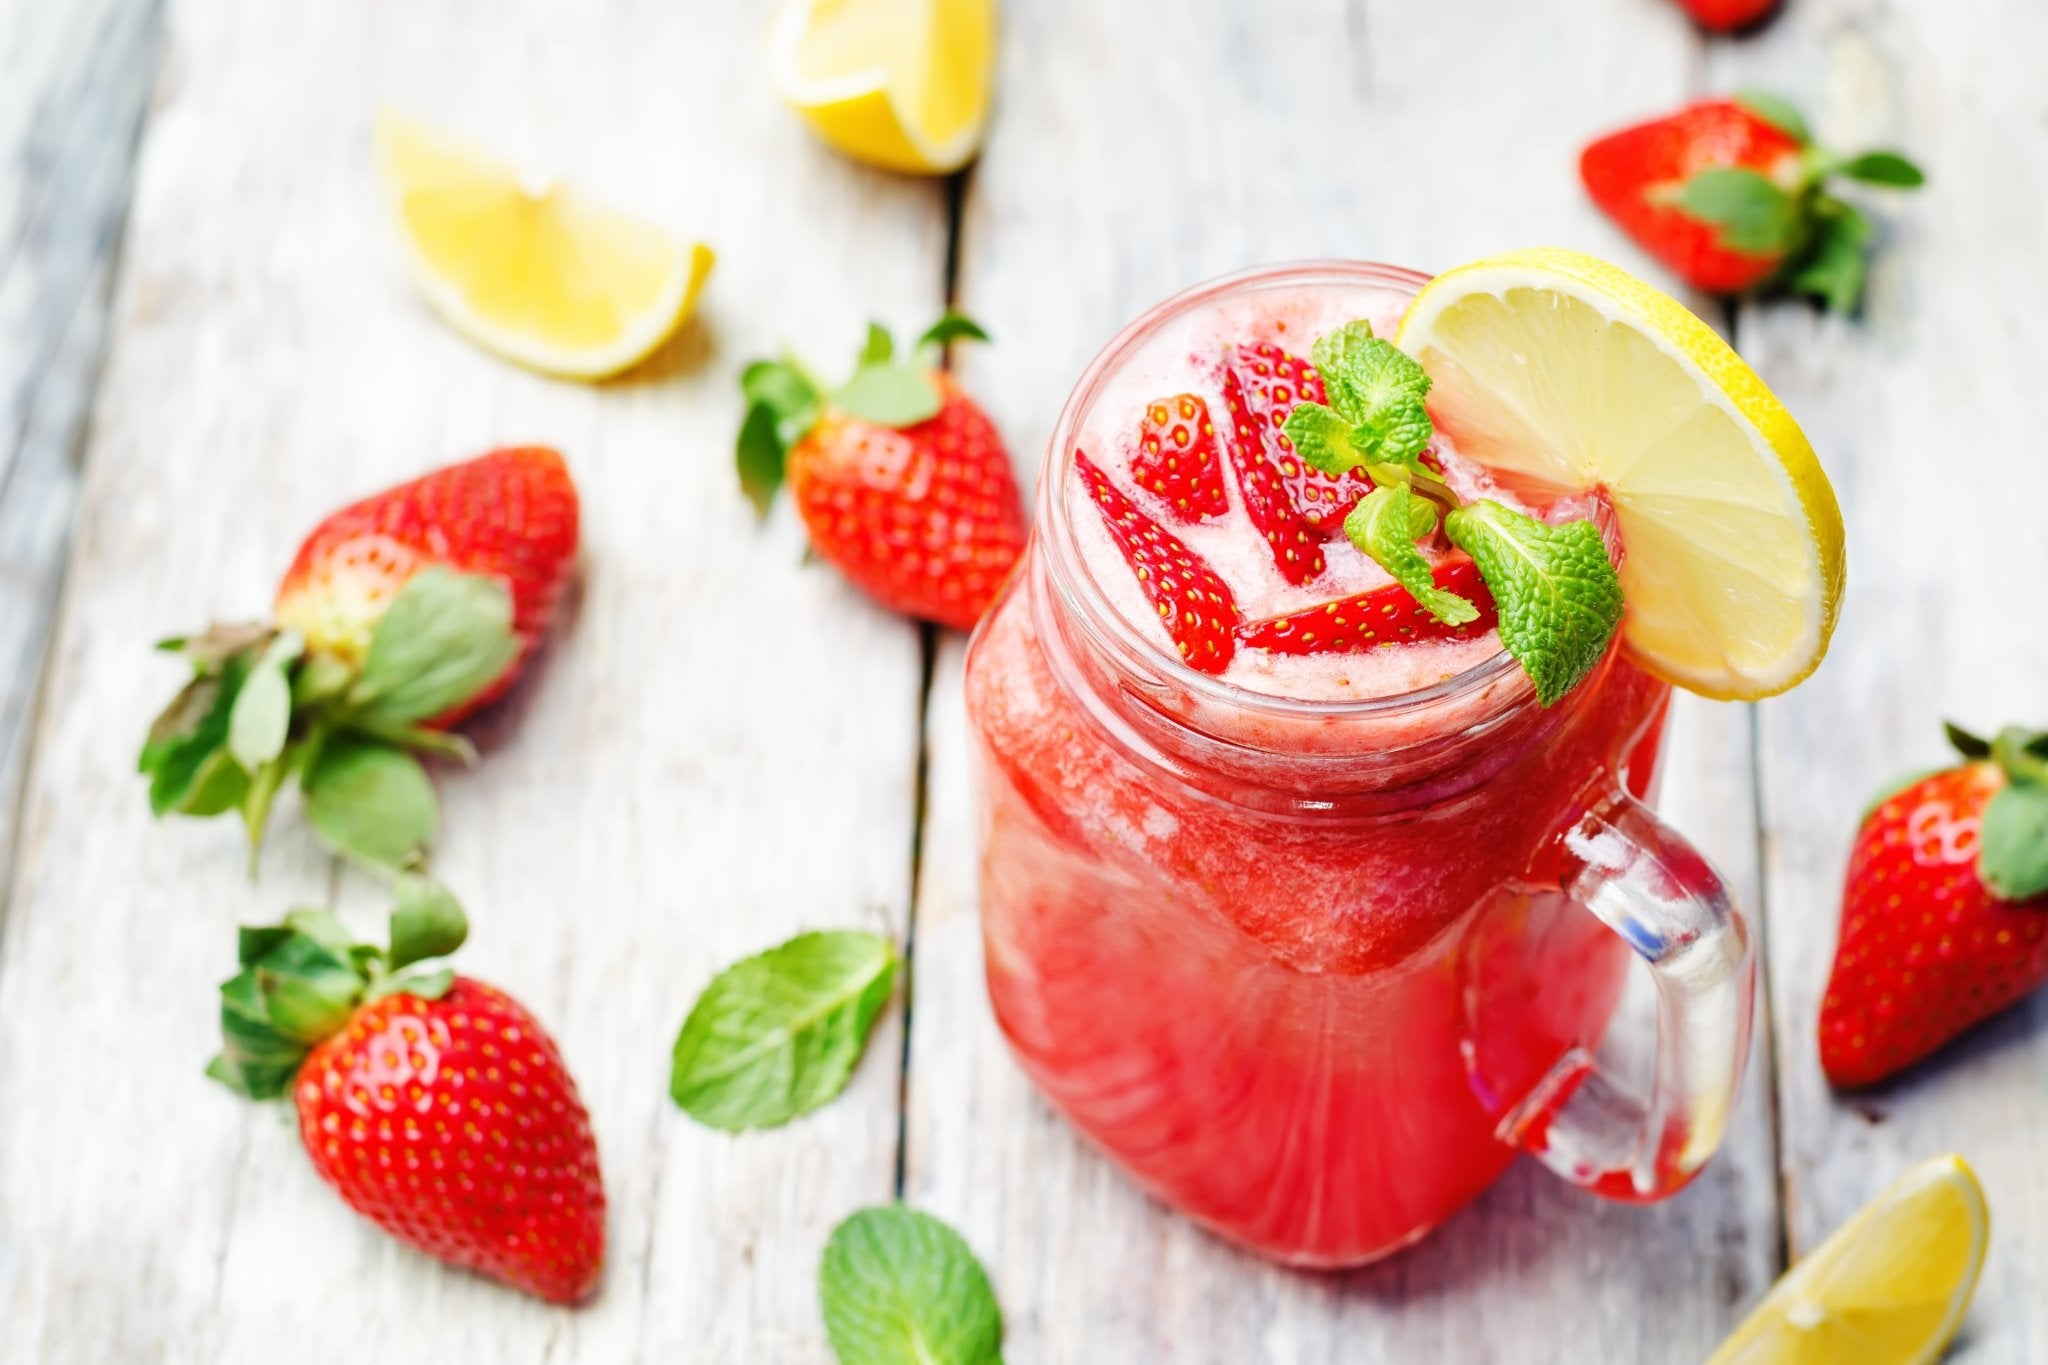 Try This Summer Recipe for More Energy and Clearer Skin: Matcha Strawberry Lemonade with Mint - Loose Leaf Tea Market